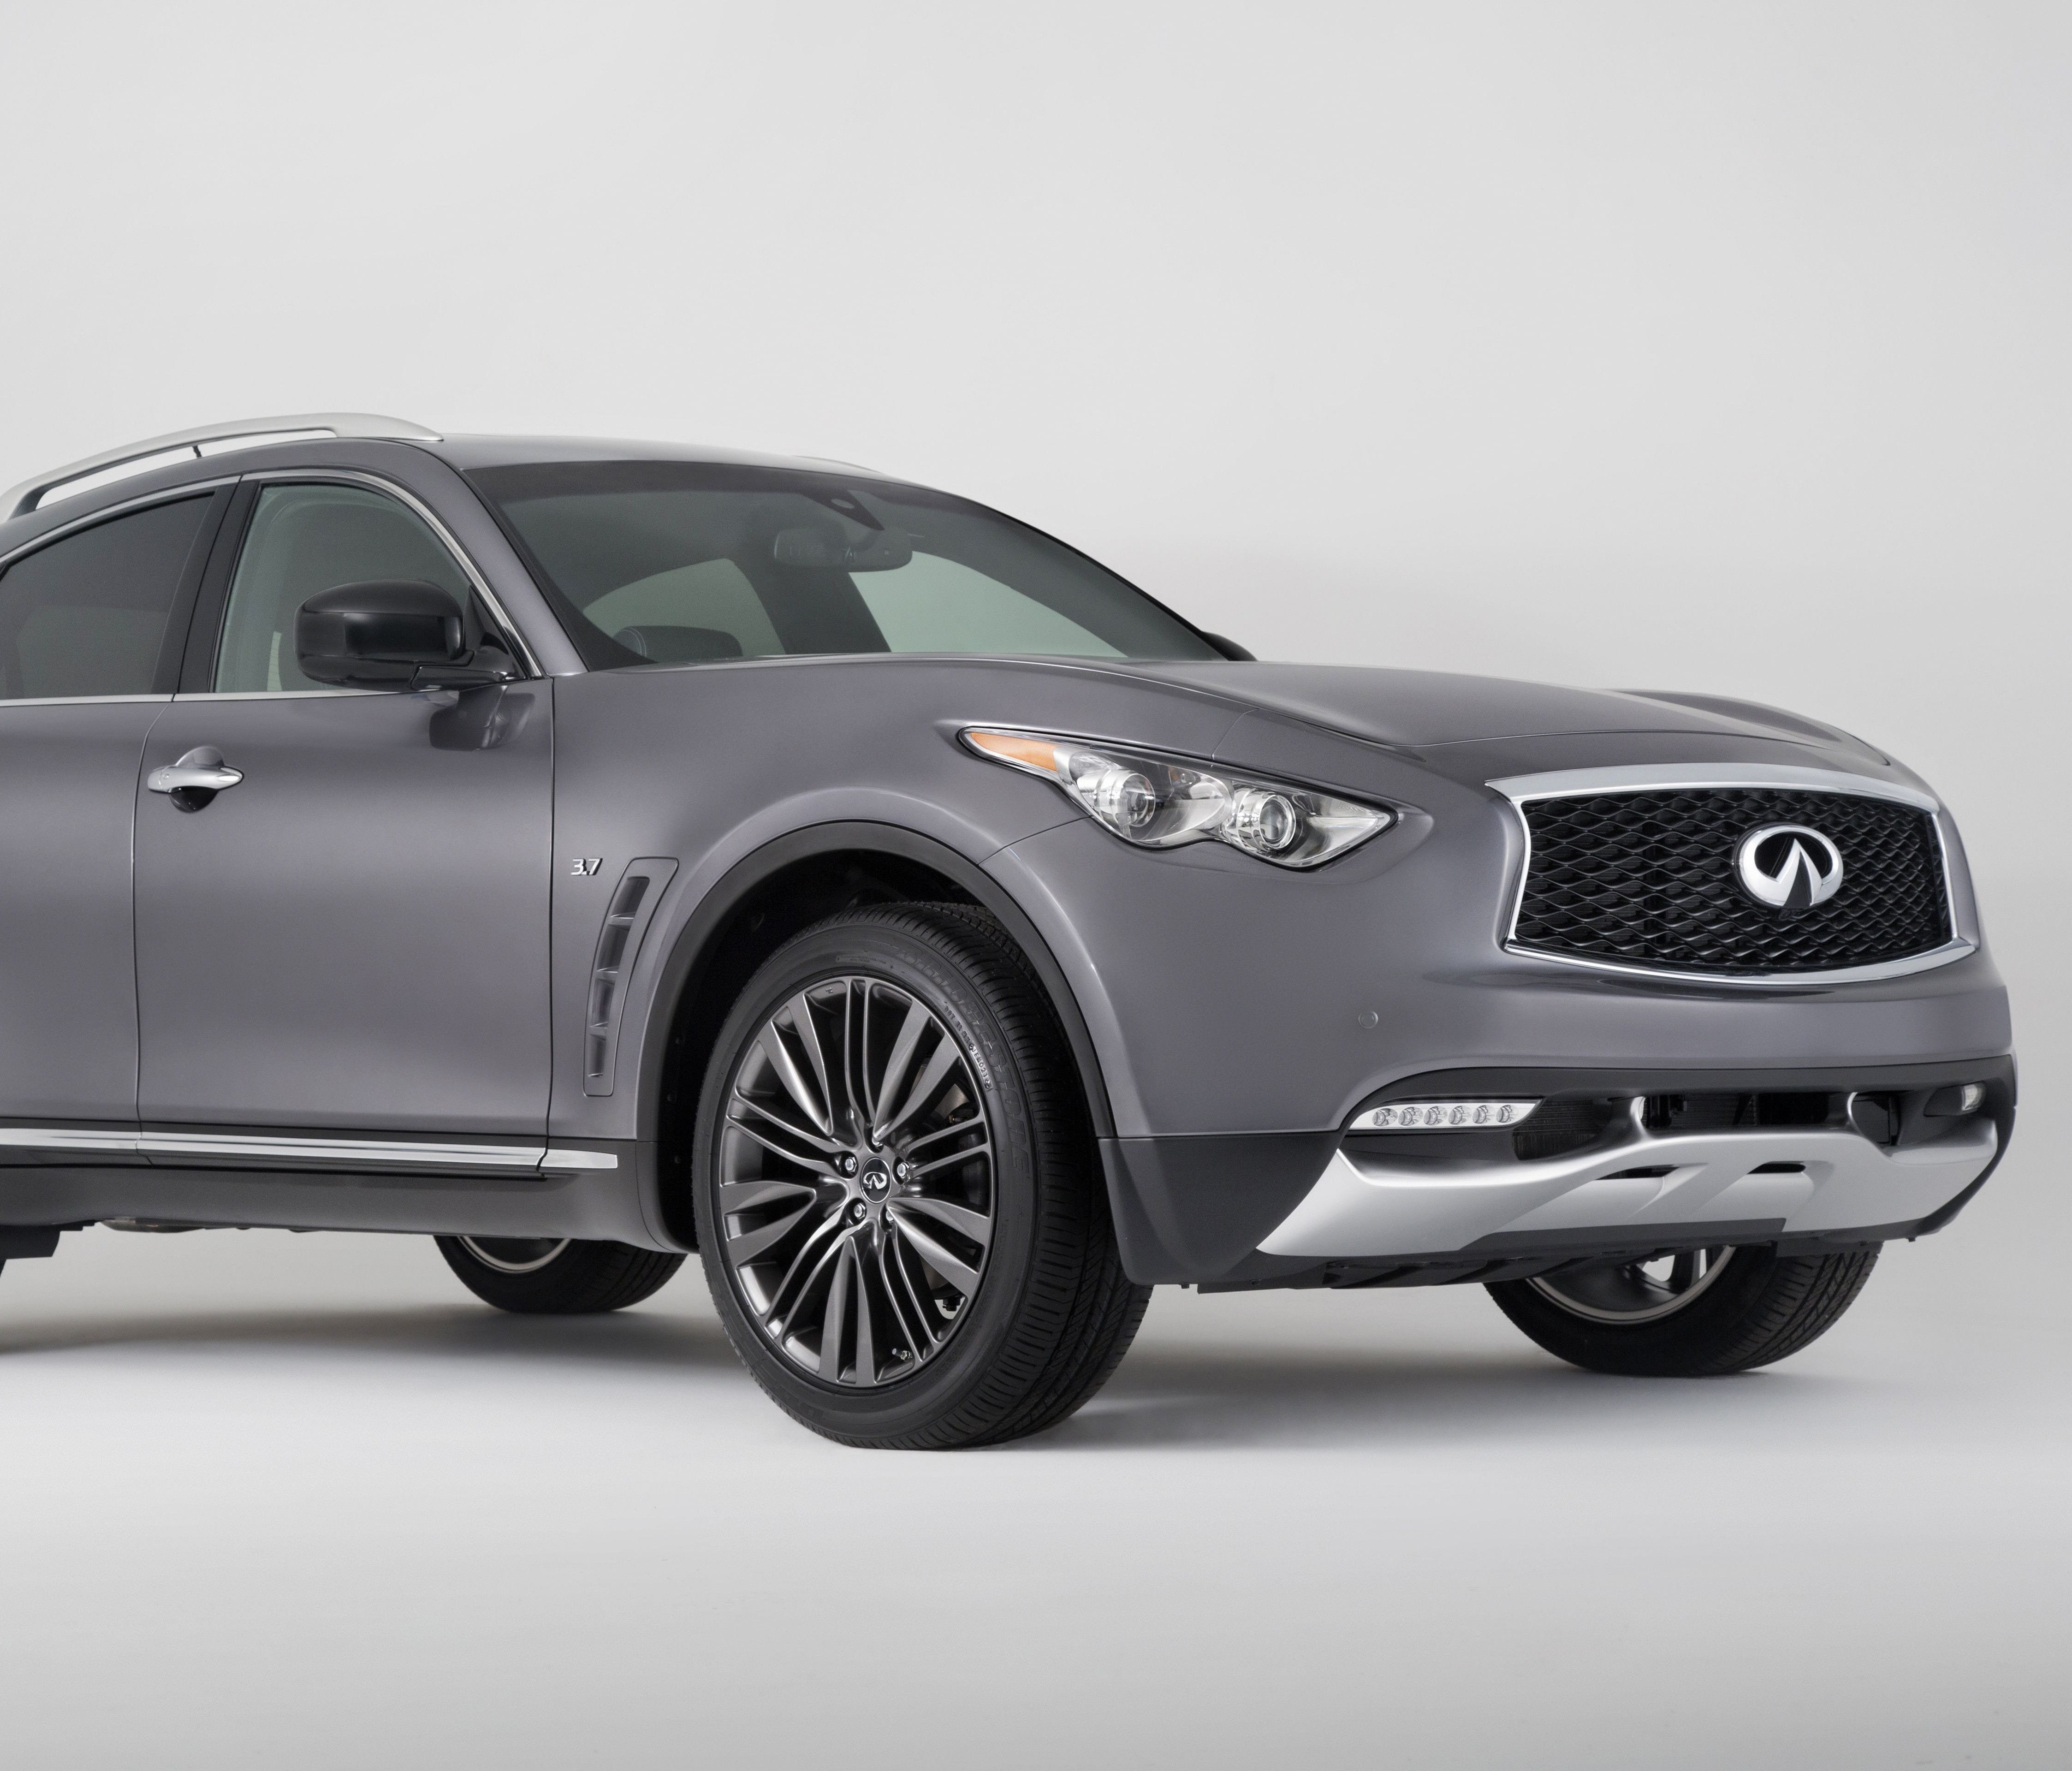 Infiniti  brings the QX70 Limited to the New York Auto Show